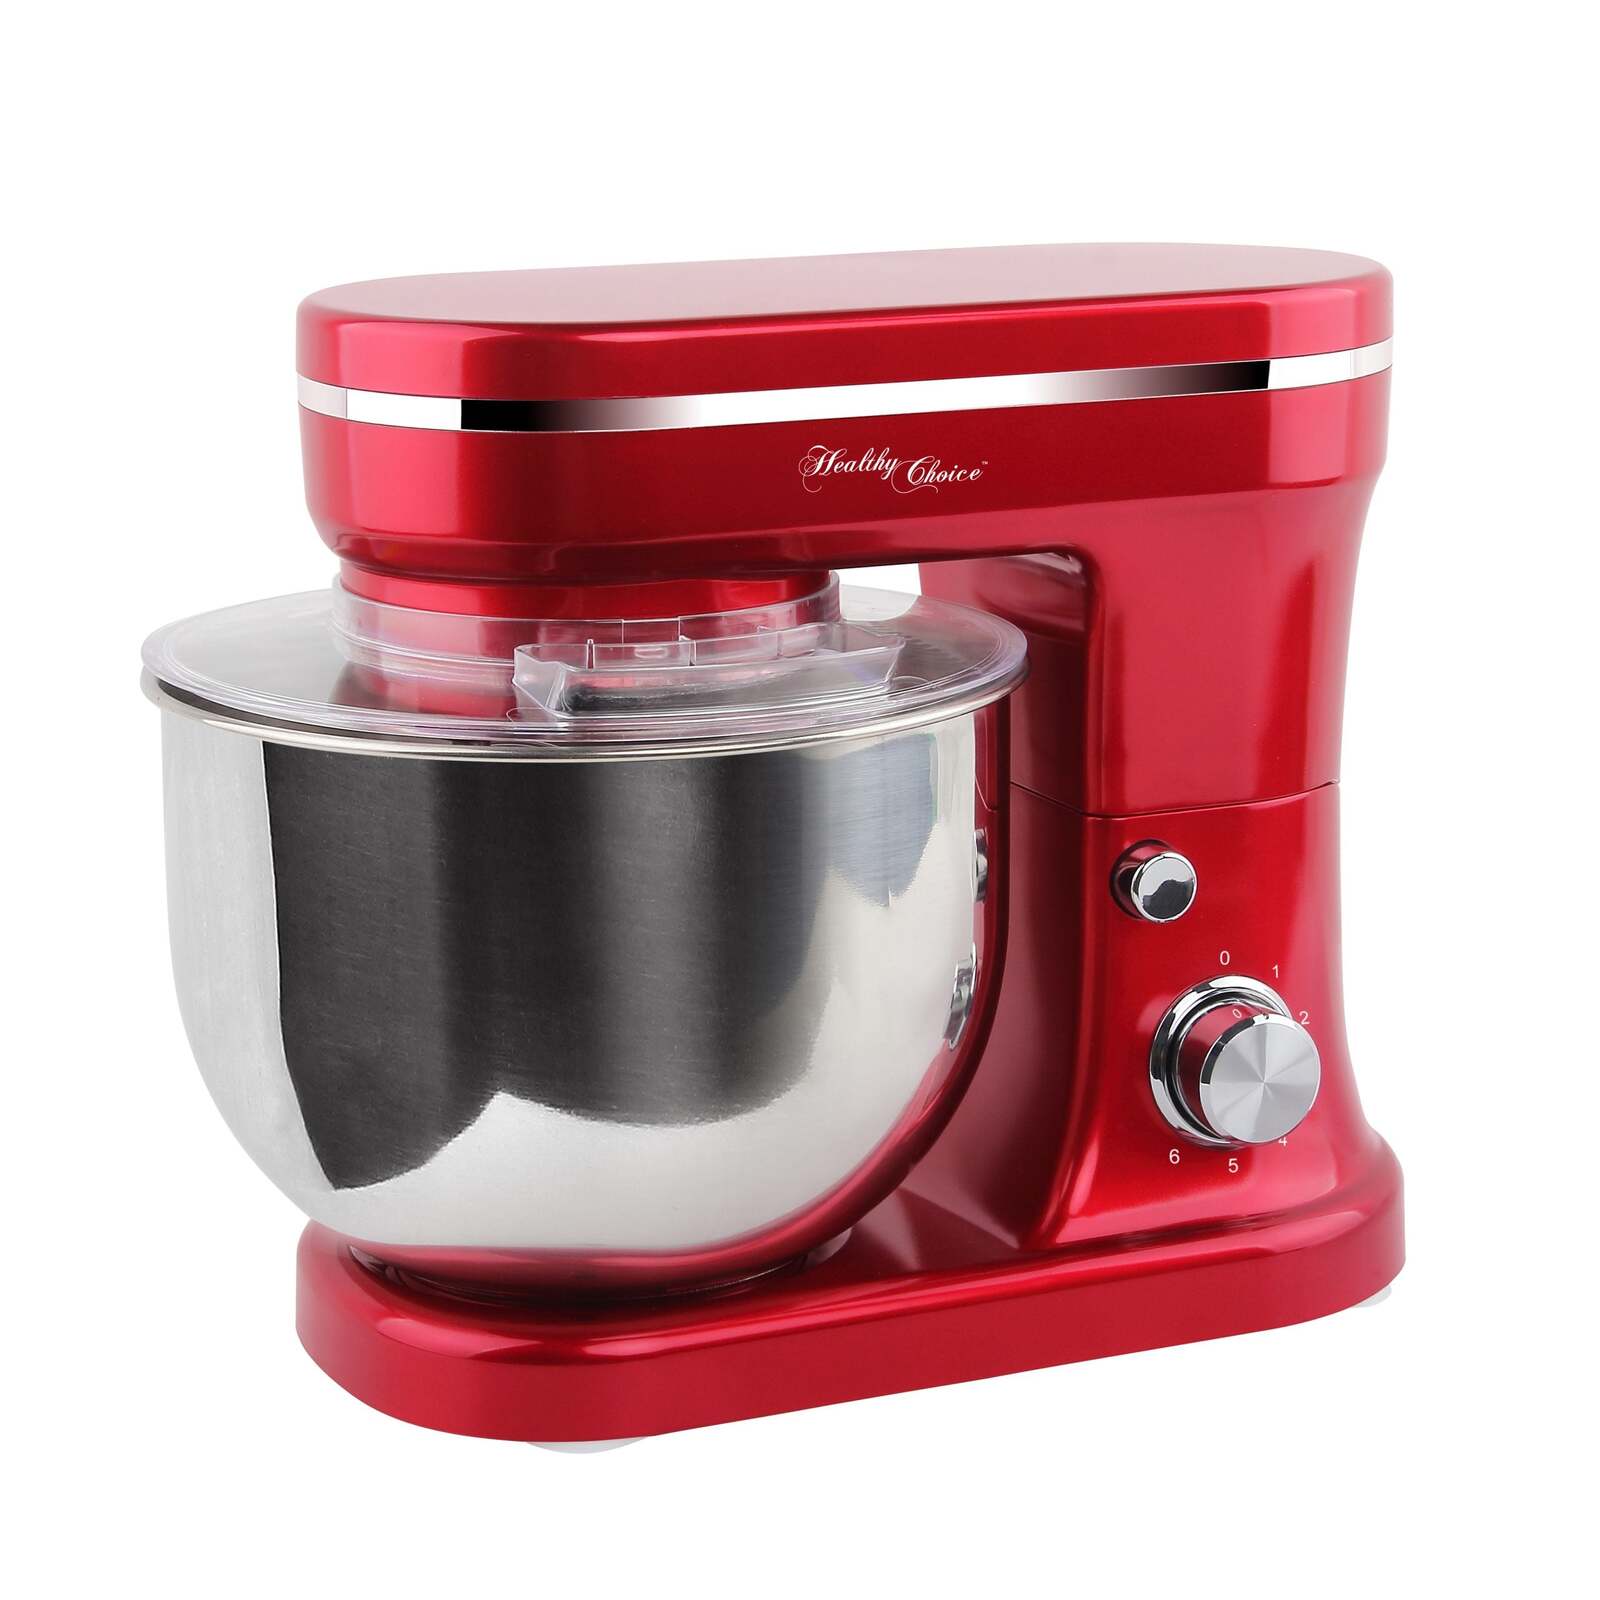 Healthy Choice 1200W Mix Master 5L Kitchen Stand (Red) w/ Bowl/ Whisk/ Beater